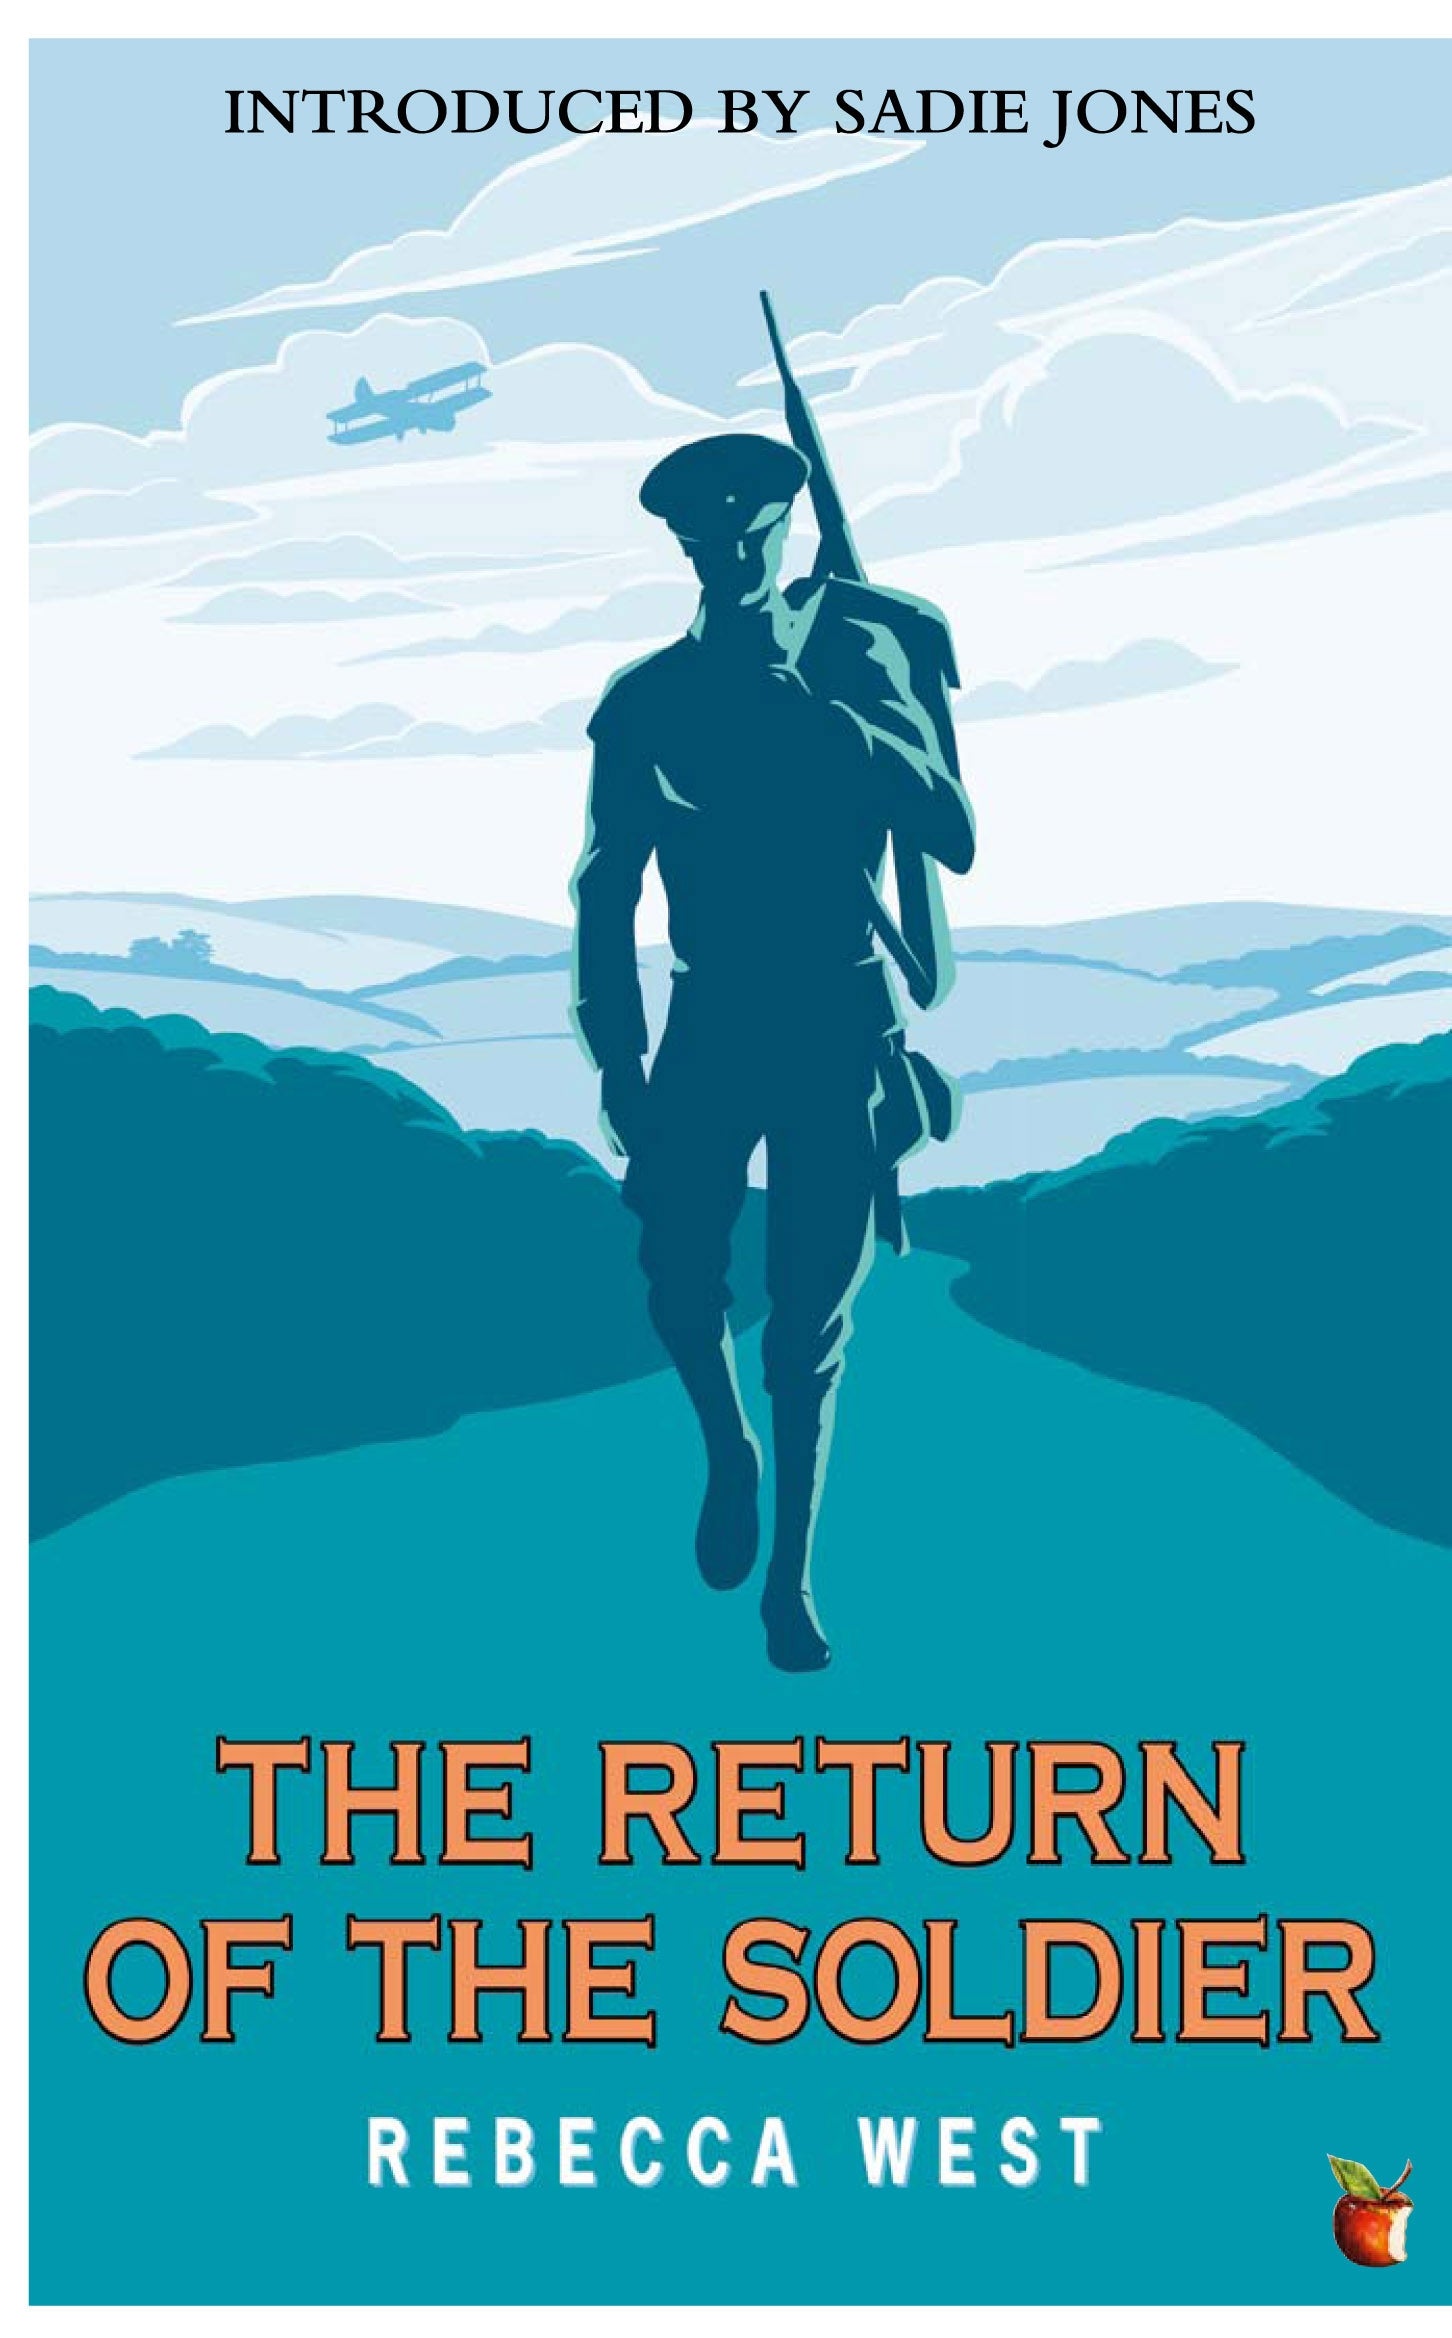 The Return Of The Soldier by Rebecca West